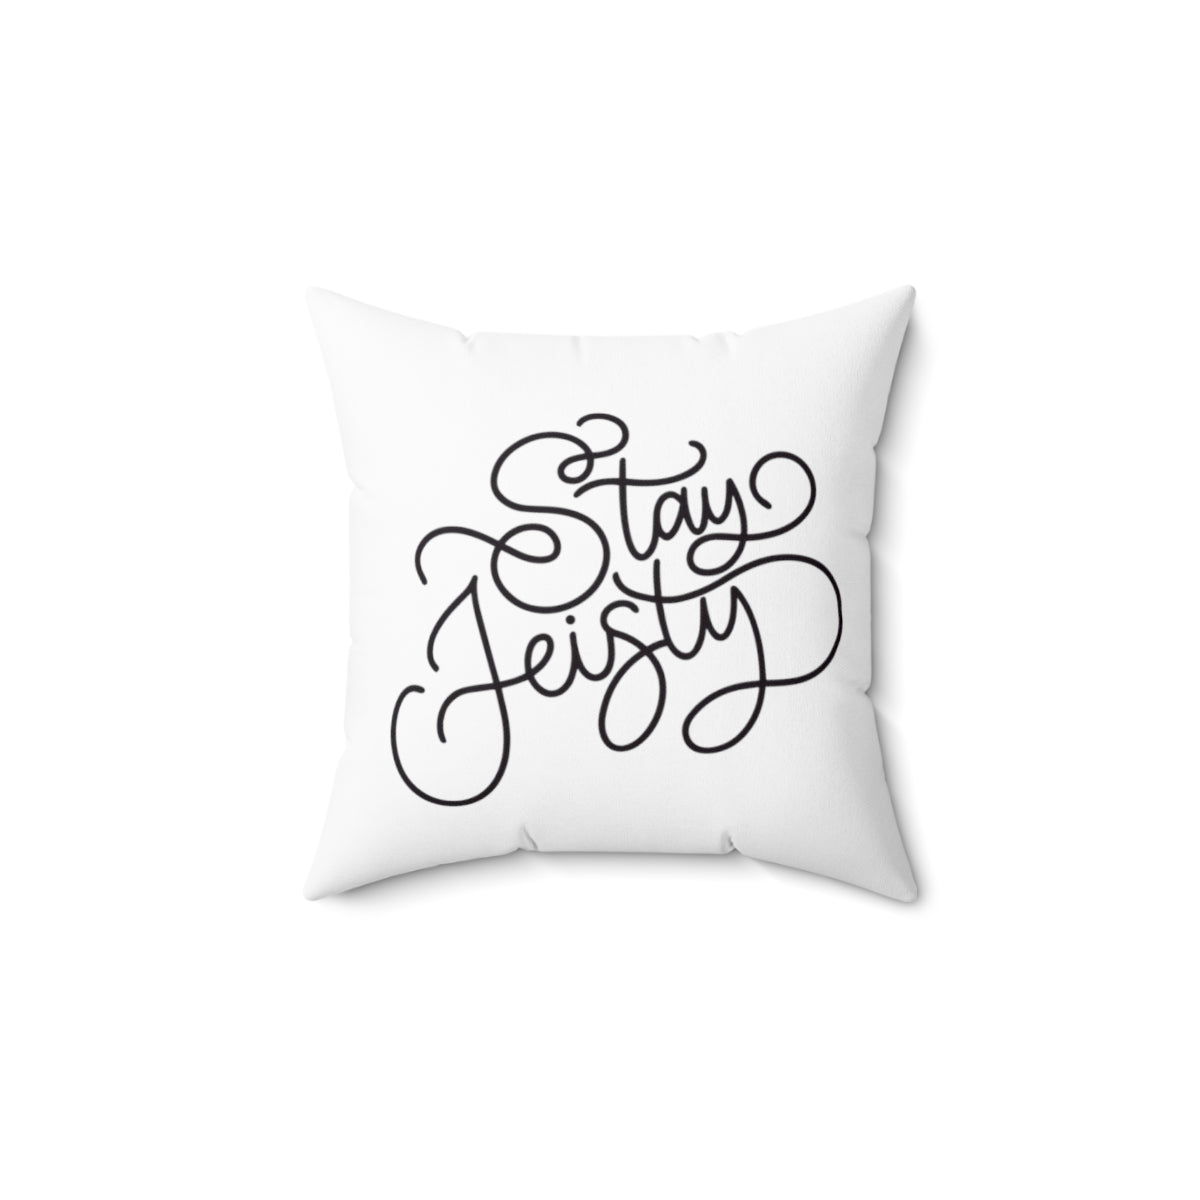 Stay Feisty (White) - Pillow